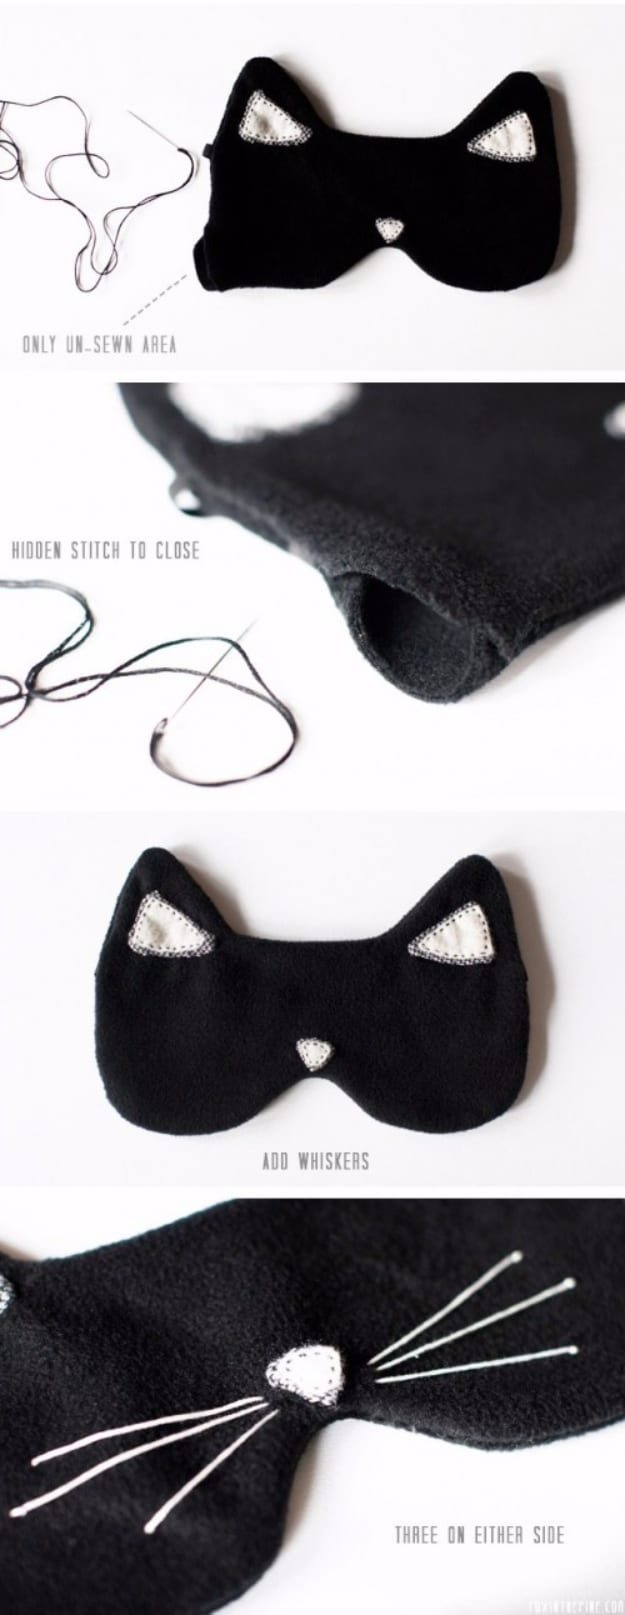 DIY Gifts To Sew For Friends - DIY Cat Eye Sleeping Mask - Quick and Easy Sewing Projects and Free Patterns for Best Gift Ideas and Presents - Creative Step by Step Tutorials for Beginners - Cute Home Decor, Accessories, Kitchen Crafts and DIY Fashion Ideas #diy #crafts #sewing